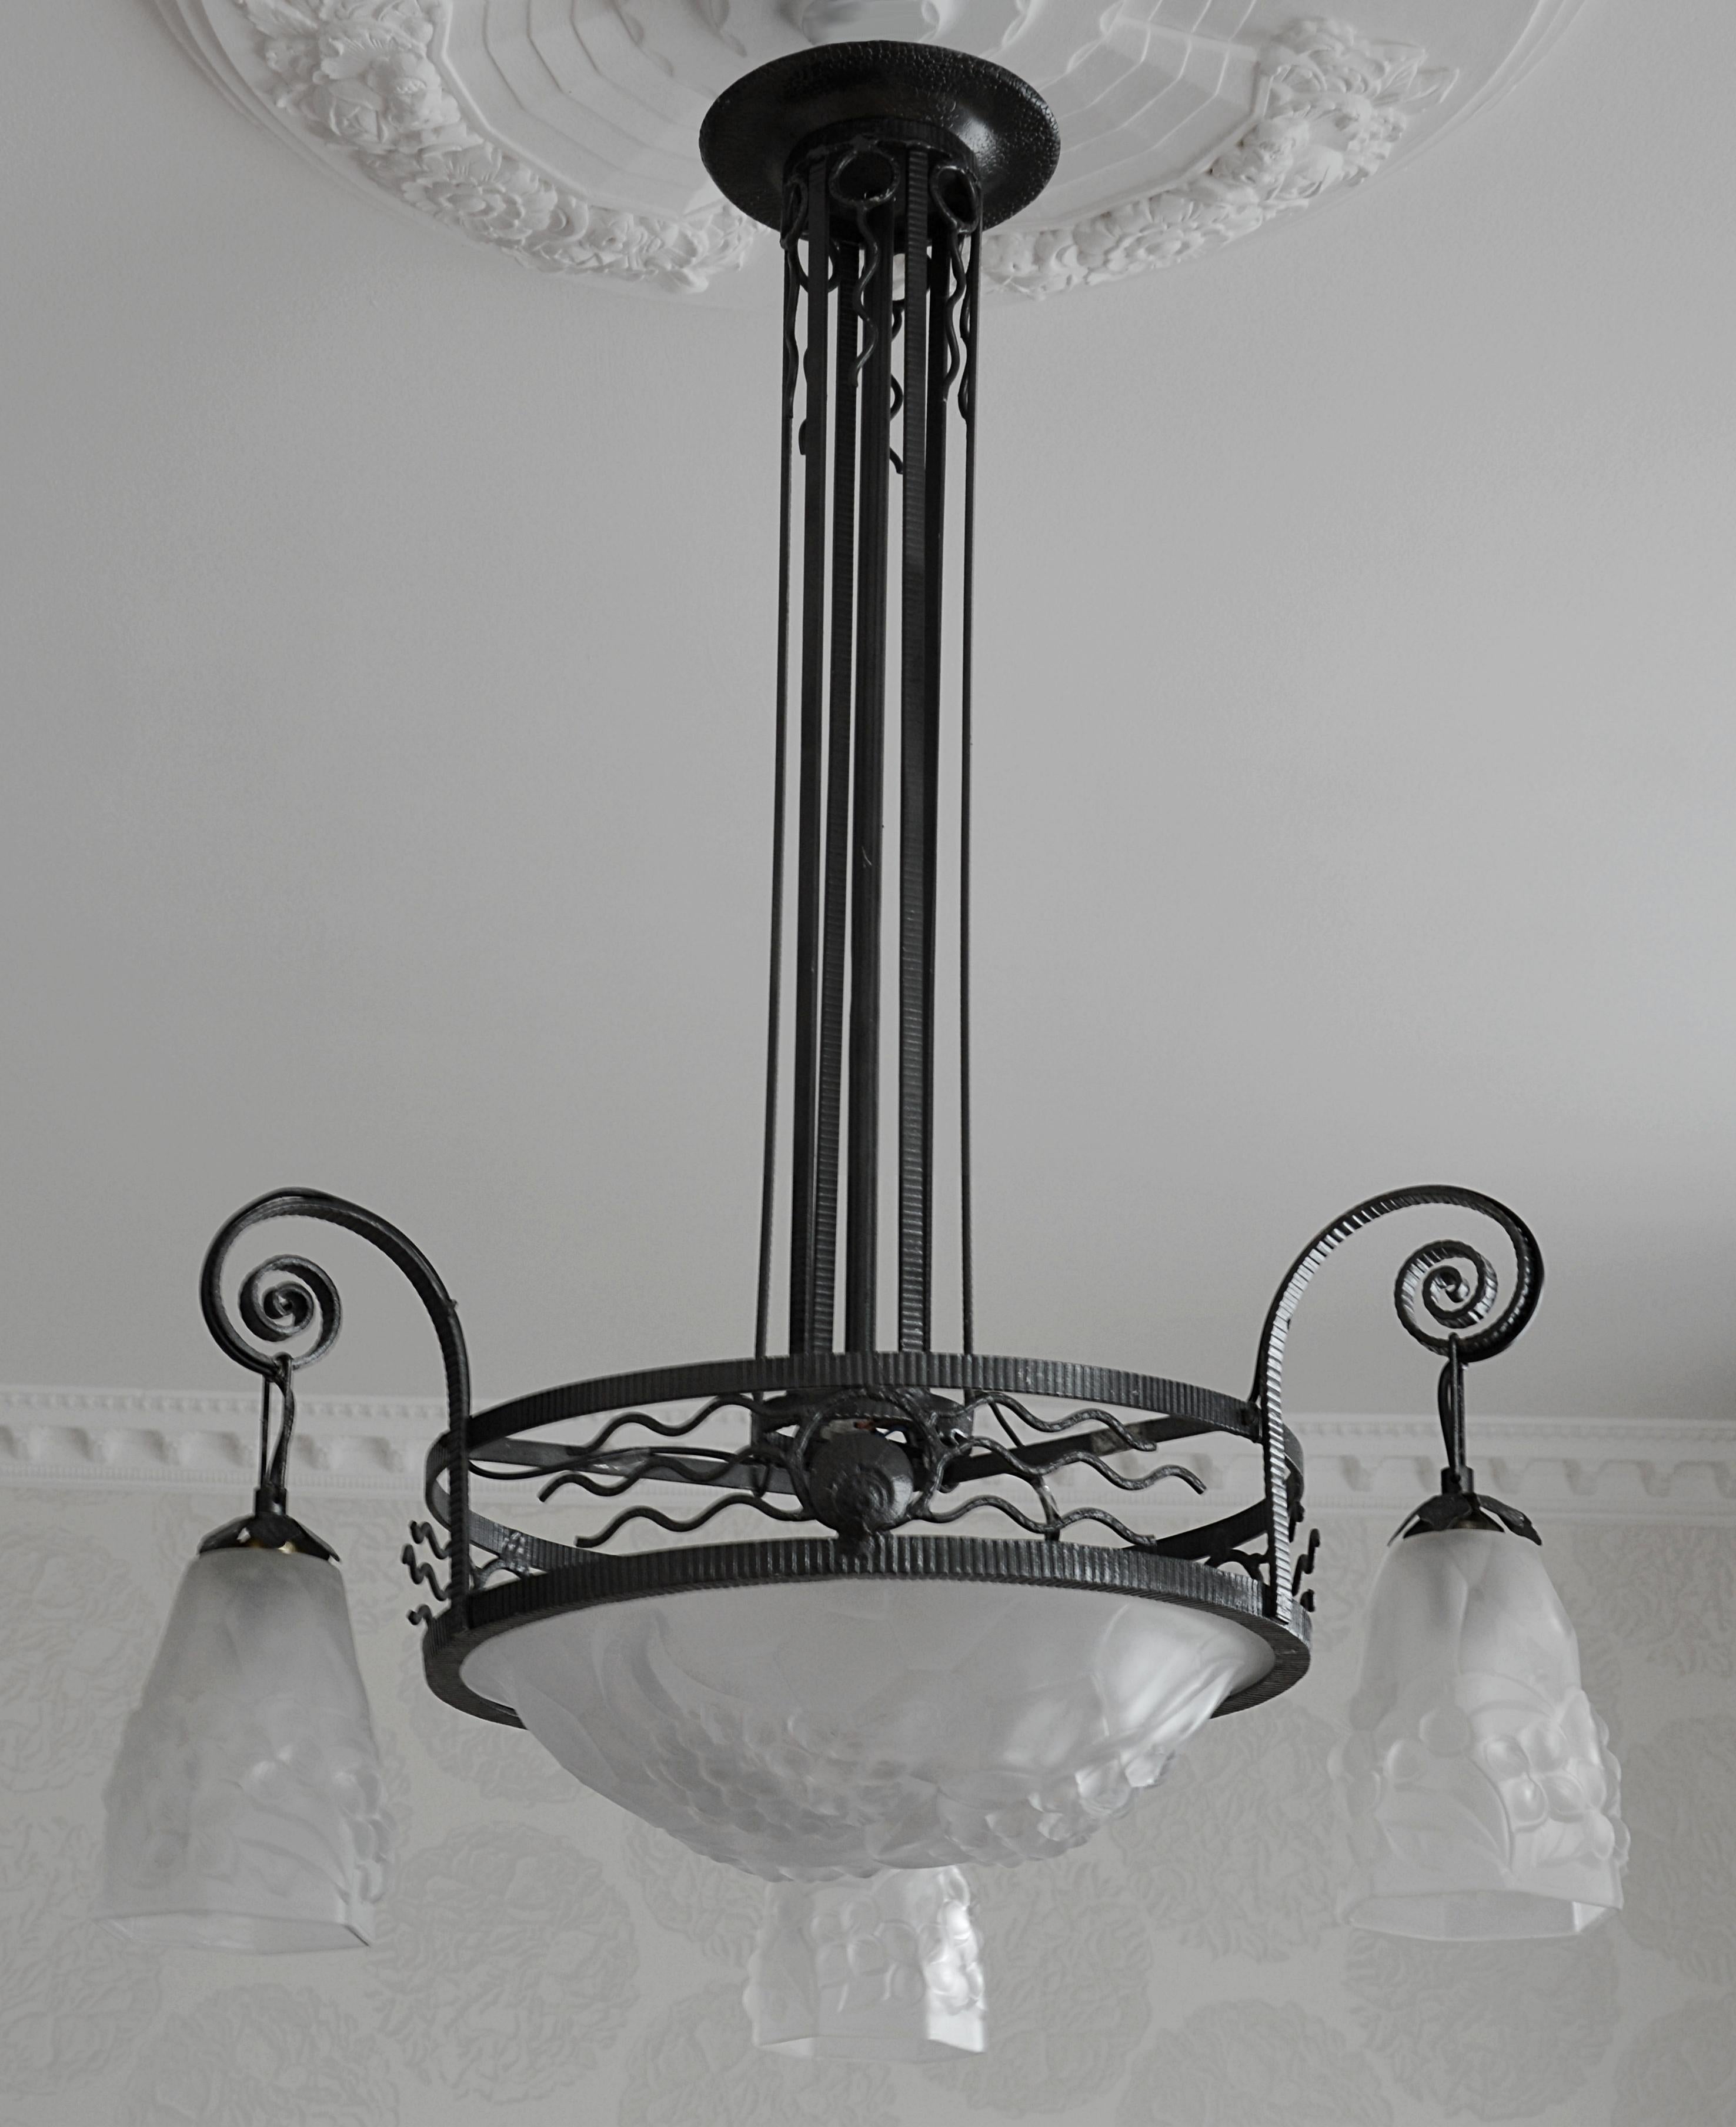 French Art Deco chandelier by Degue and Vasseur, France, late 1920s. Thick molded glass lampshades with a hydrangea pattern by Degue (Compiegne) hanged on a wrought iron metal frame by Marcel Vasseur, 22 rue Mousset-Robert in Paris. Measures: Height